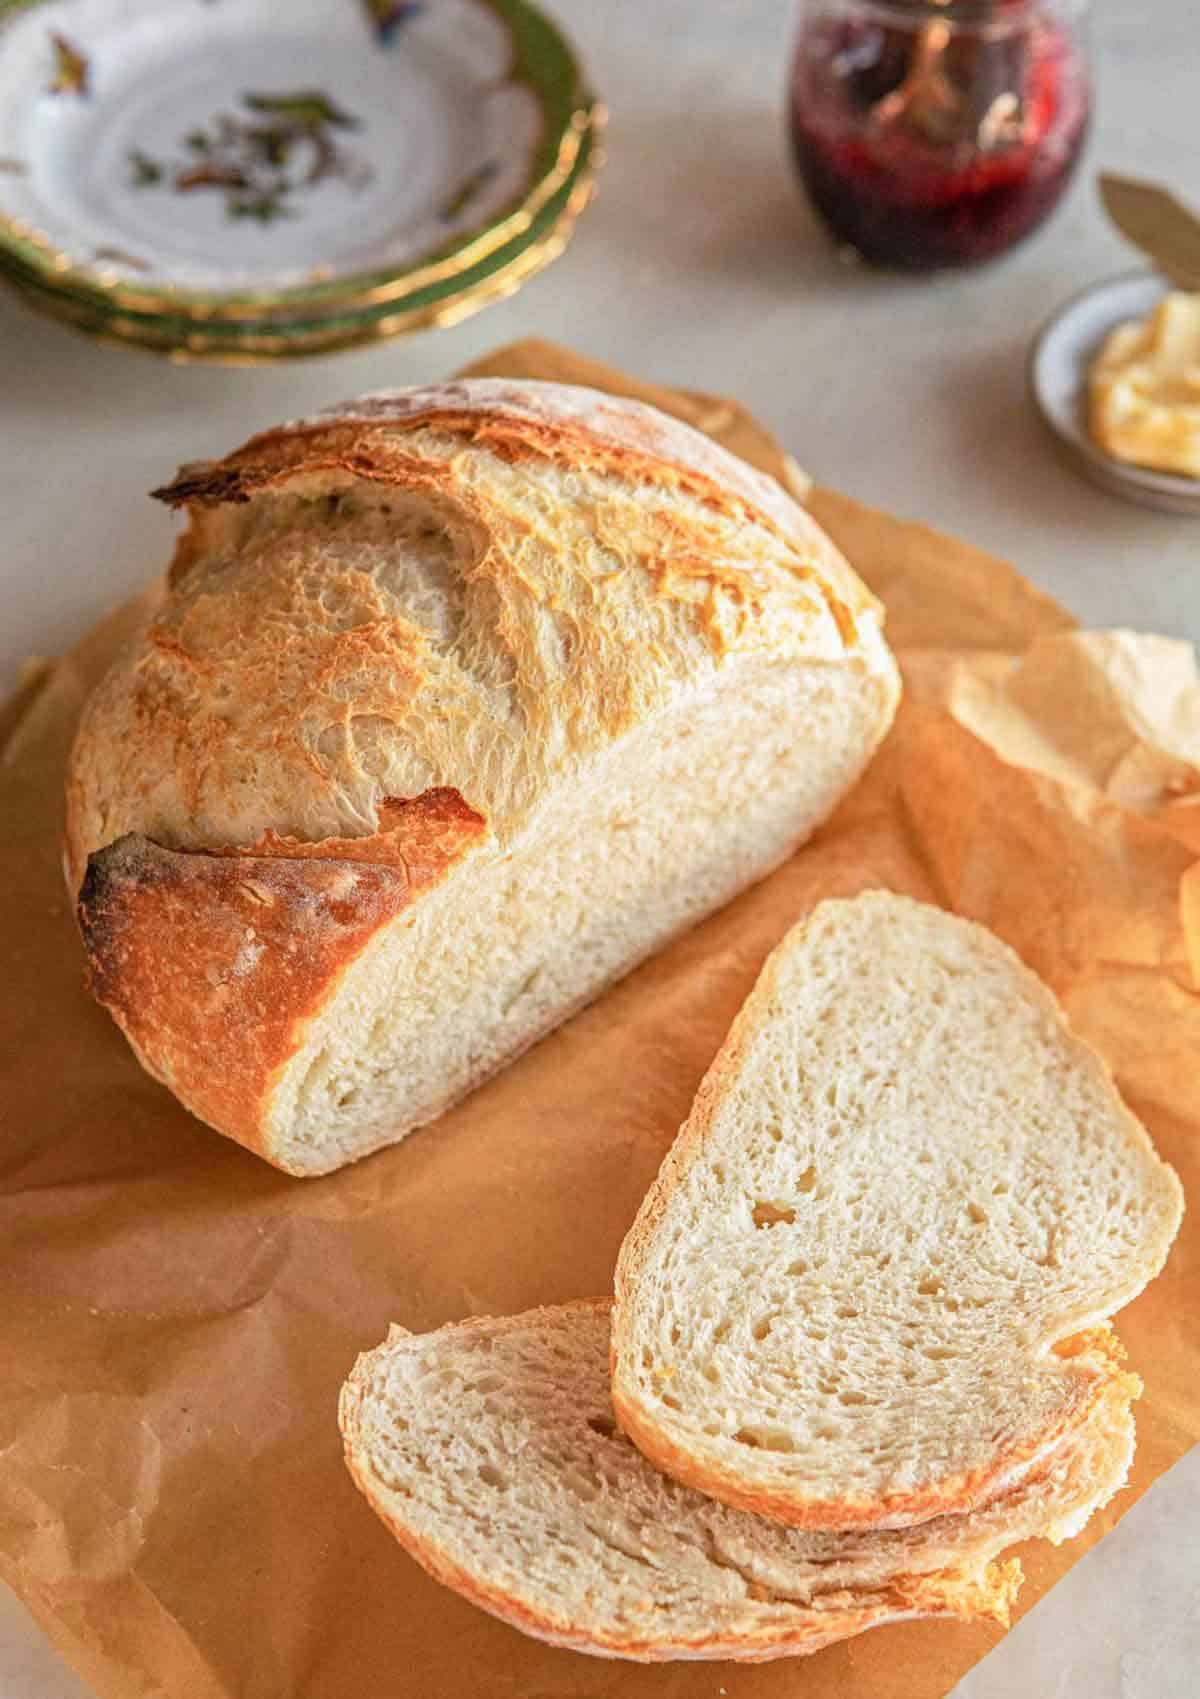 II. Benefits of Making Your Own Artisan Bread